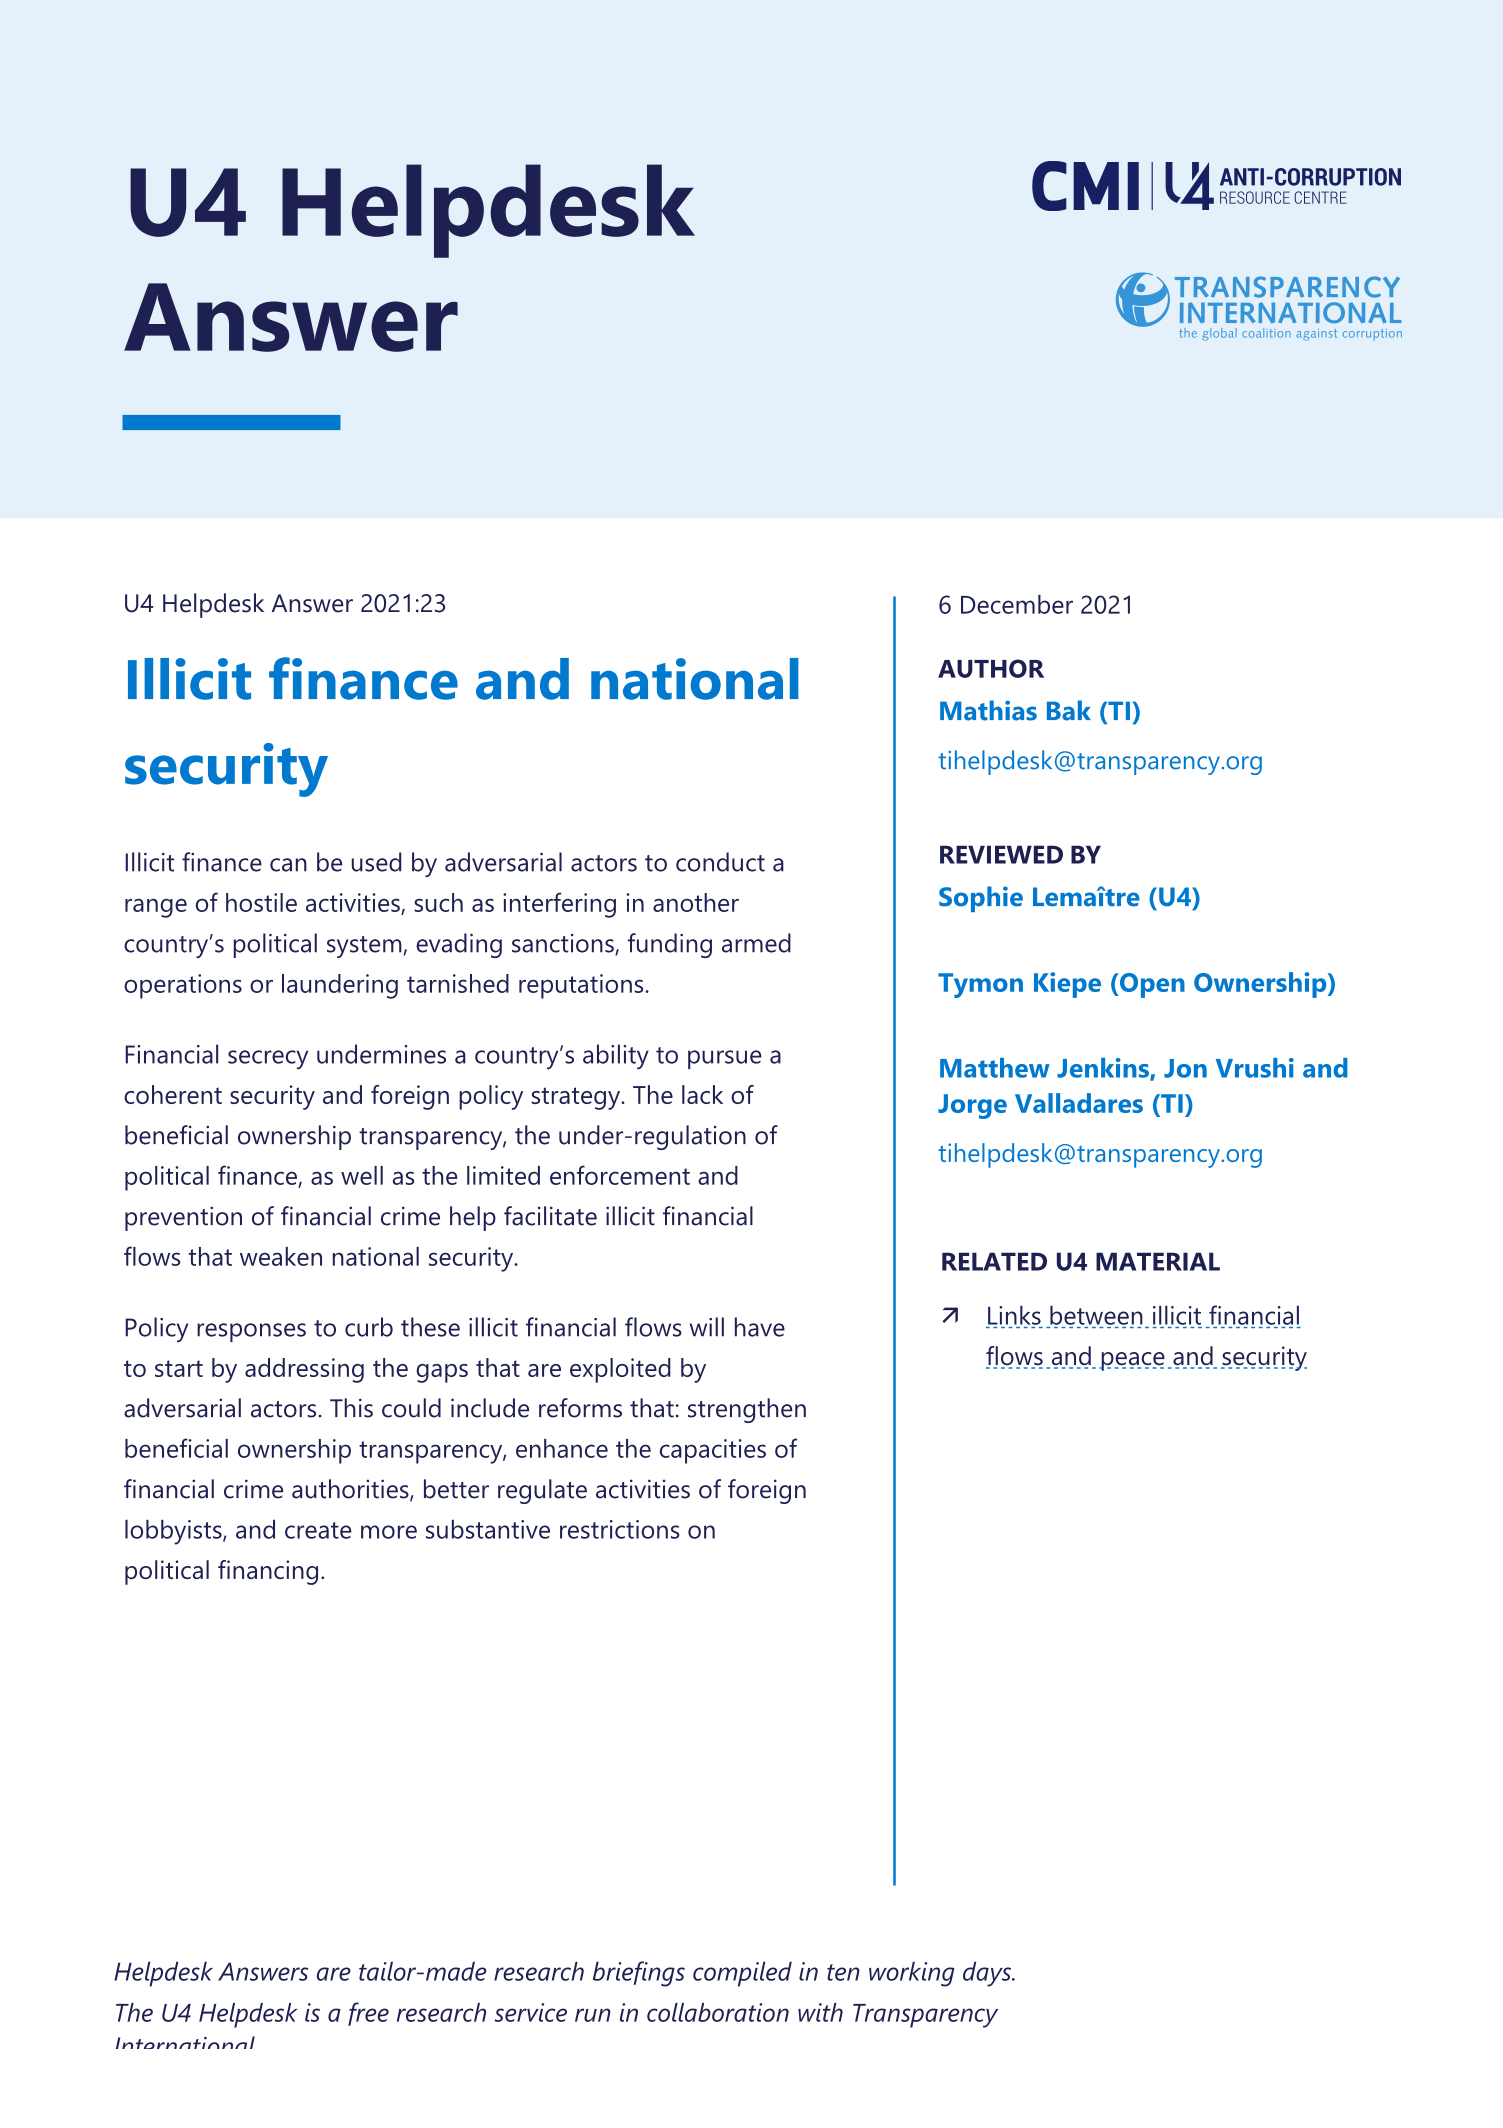 Illicit finance and national security